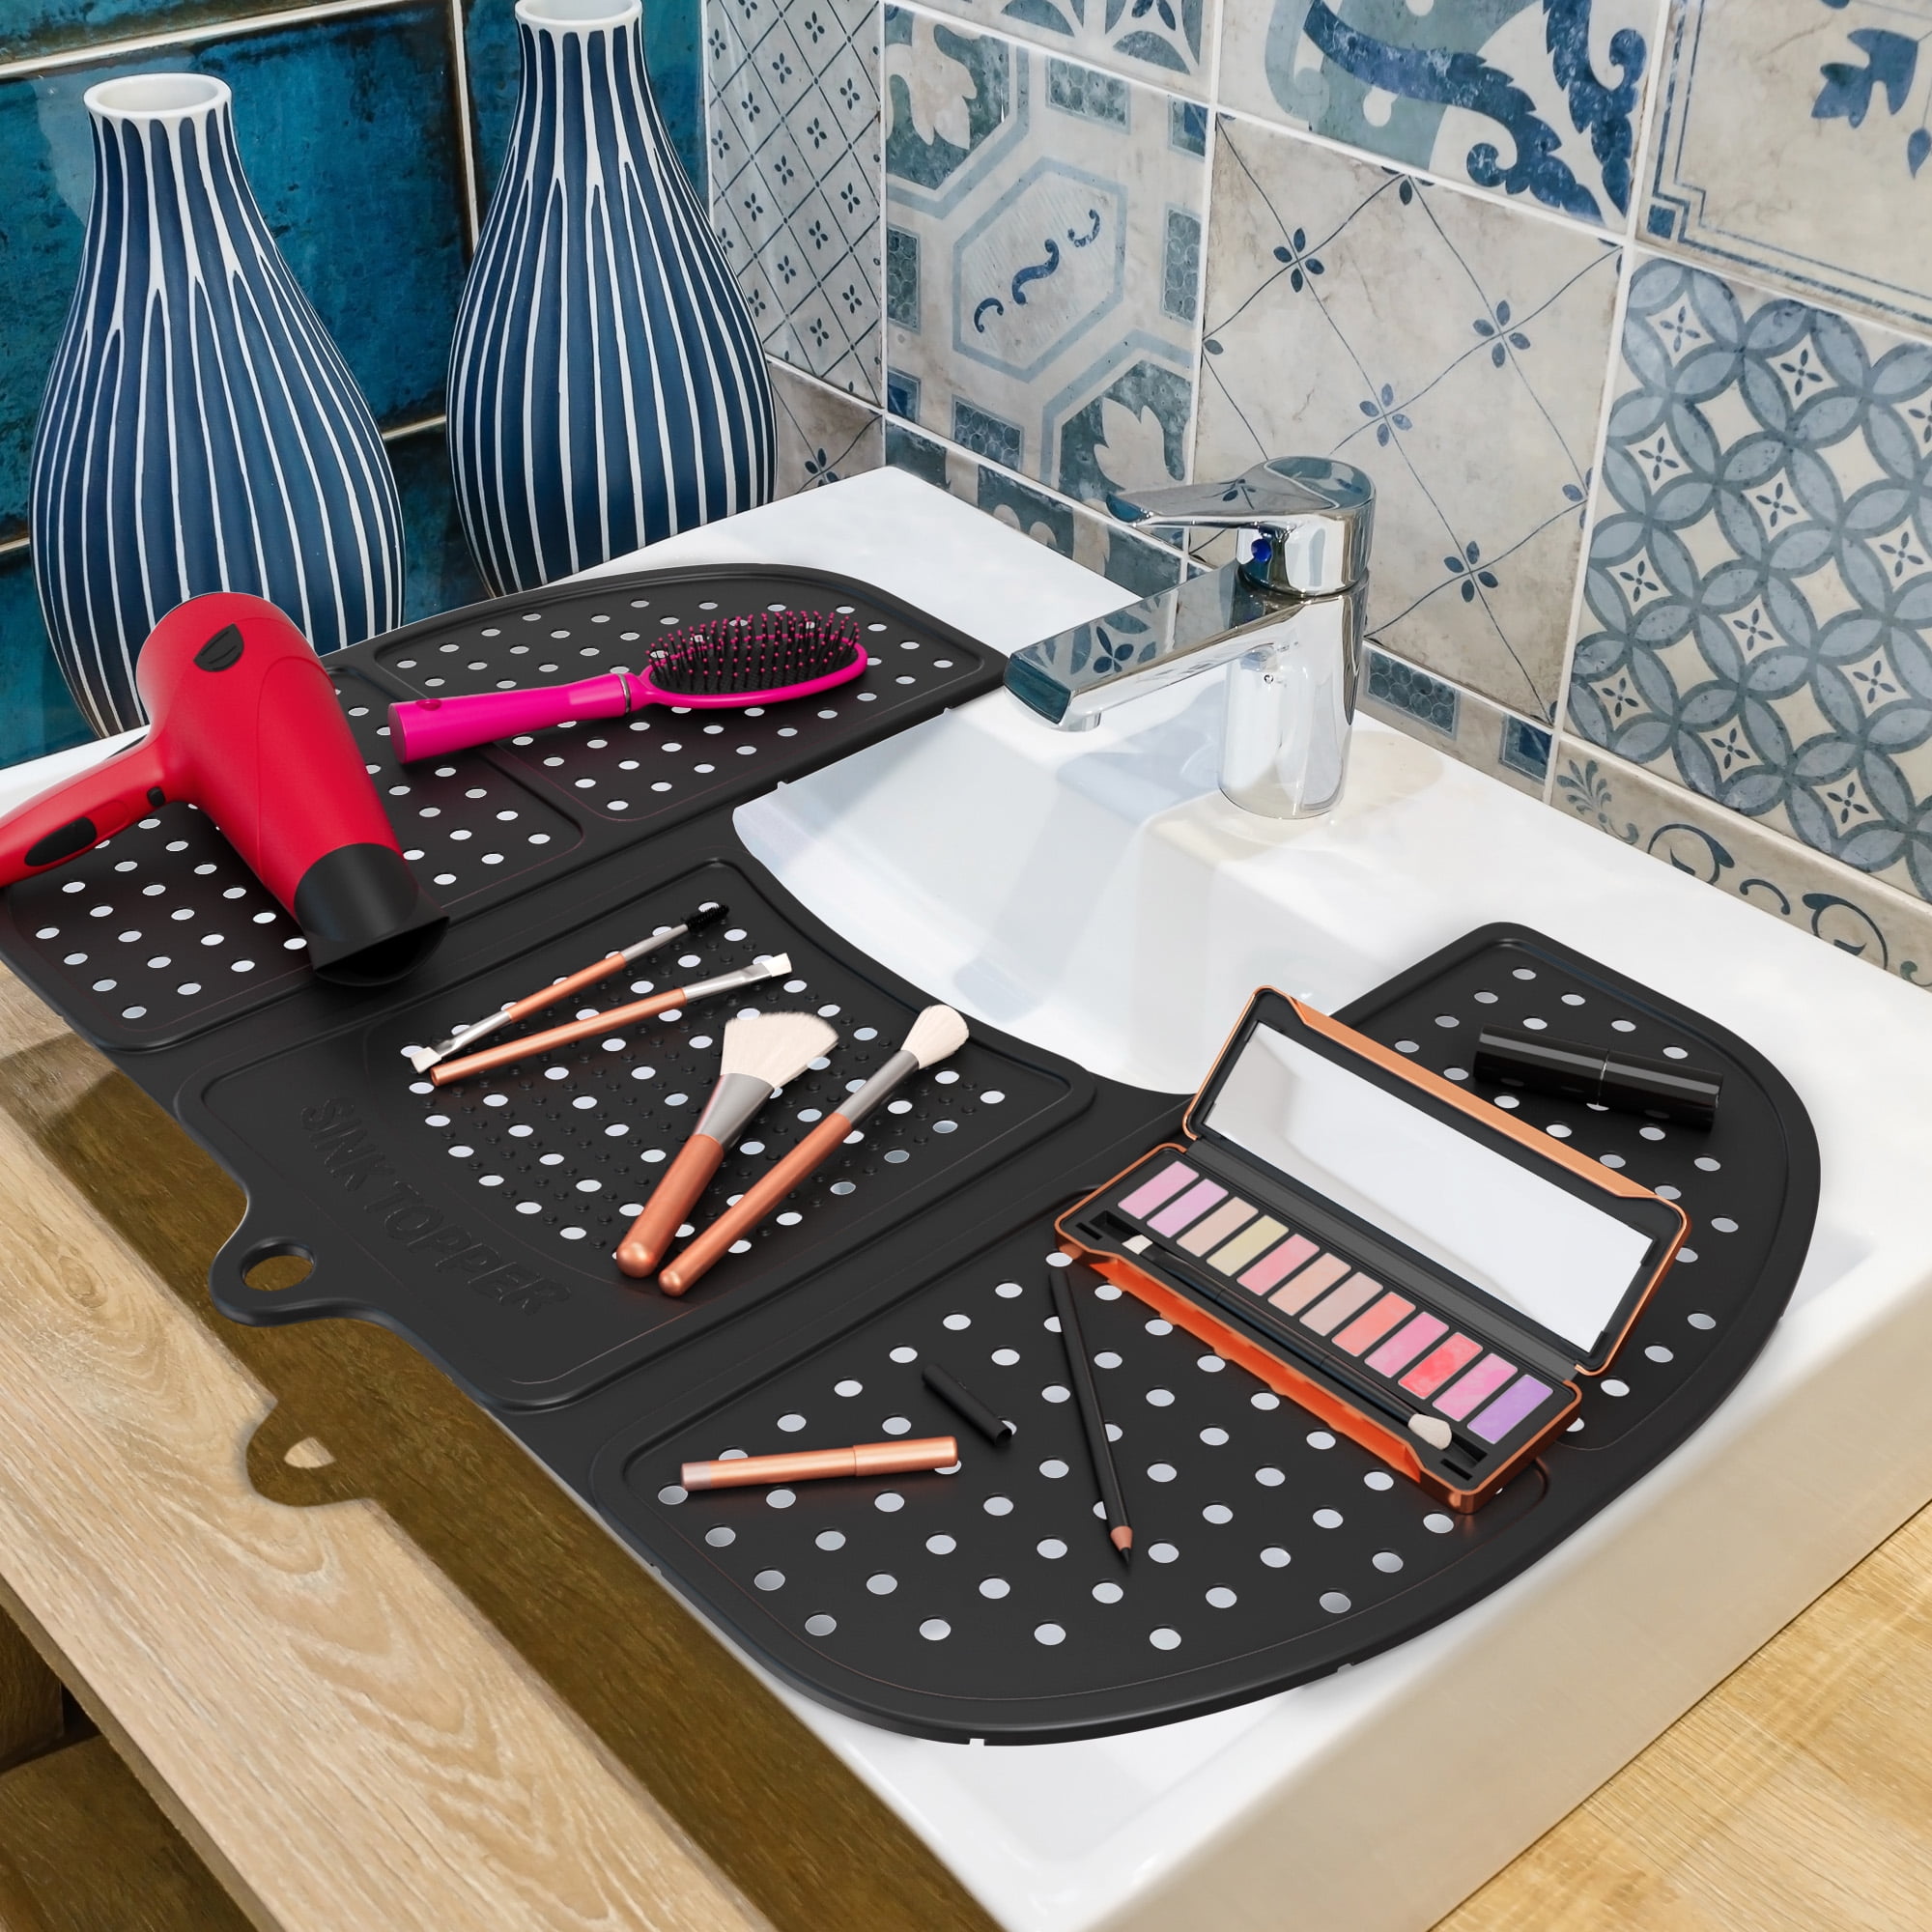 Sink Topper Foldable Sink Cover - Silicone Beauty Makeup Brush Cleaning Mat  - Vanity Tools Organizer - Bathroom Must Have Accessory for Extra Space 